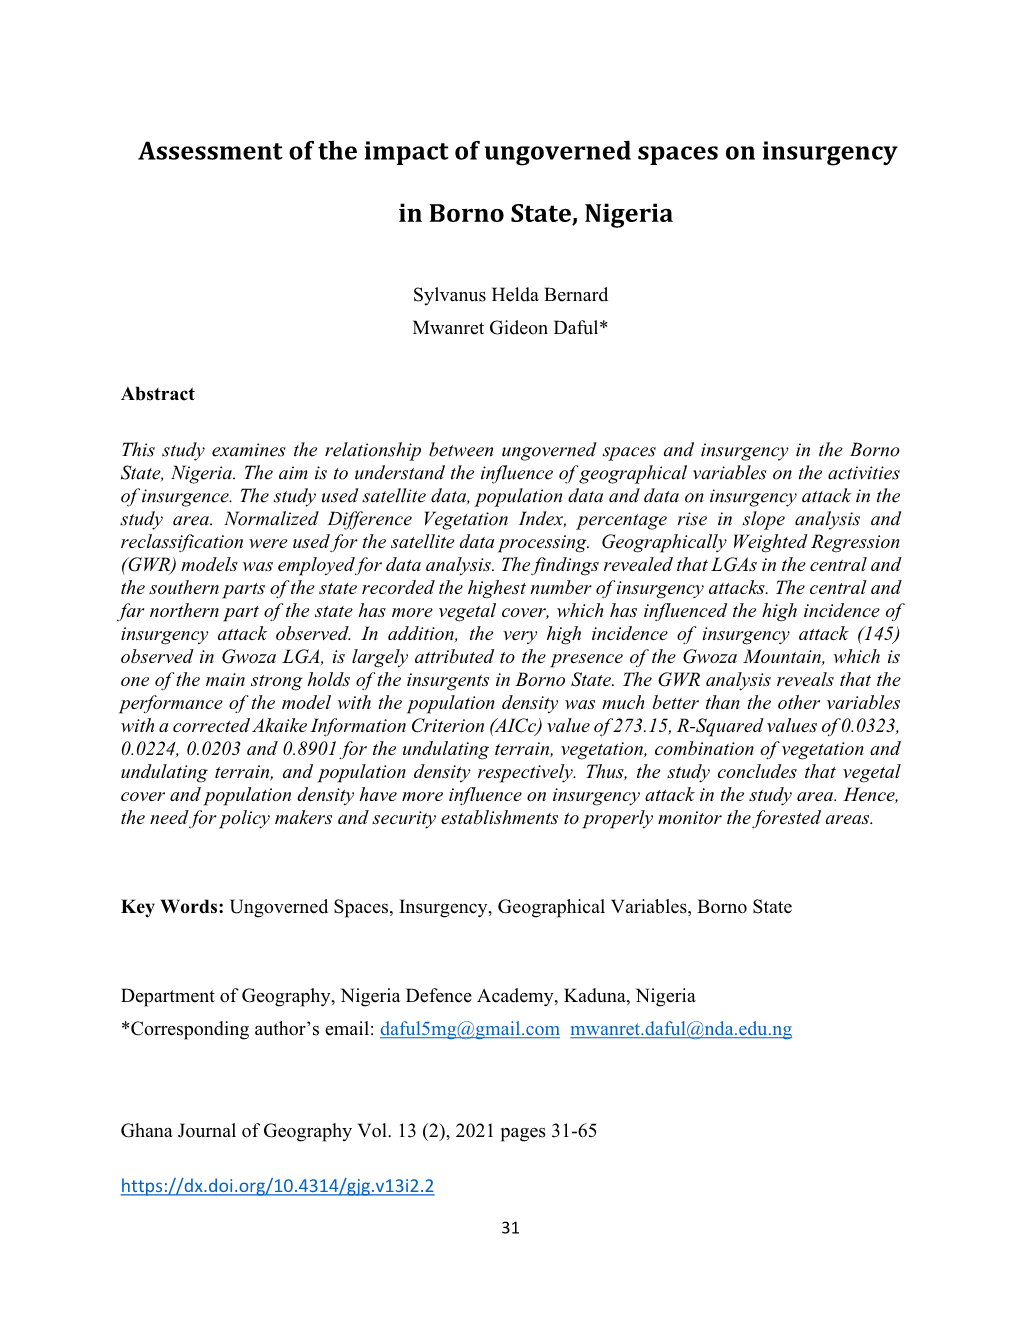 Assessment of the Impact of Ungoverned Spaces on Insurgency